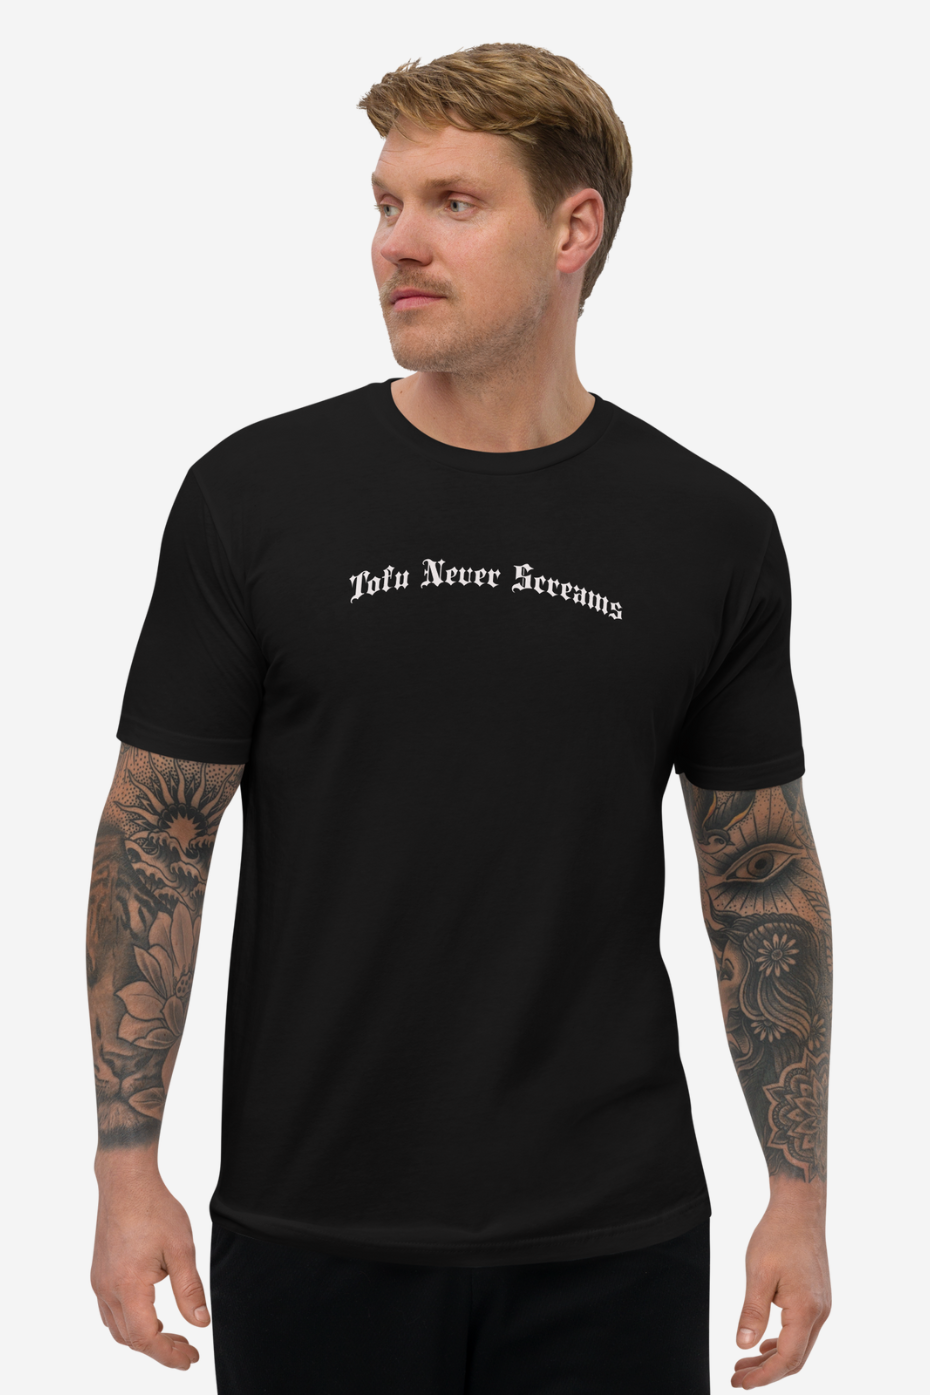 Tofu Never Screams Men's Fitted T-Shirt